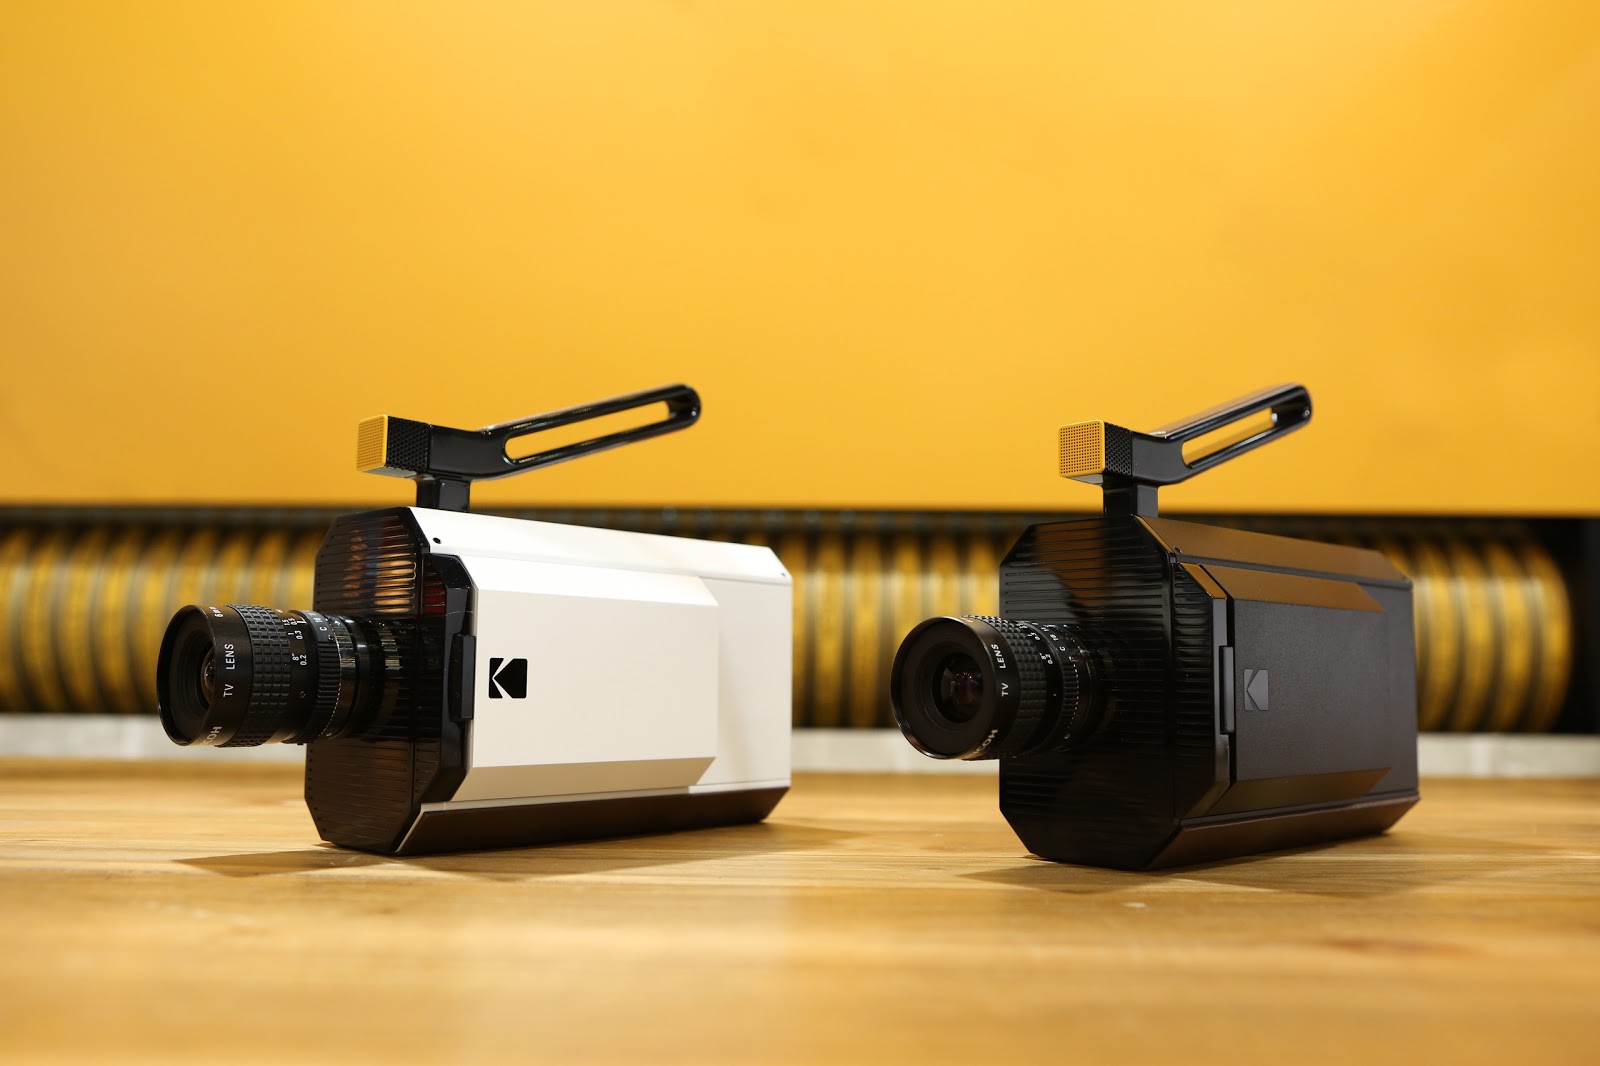 Kodak Takes CES 2016 by Storm with New Super 8mm Film Camera